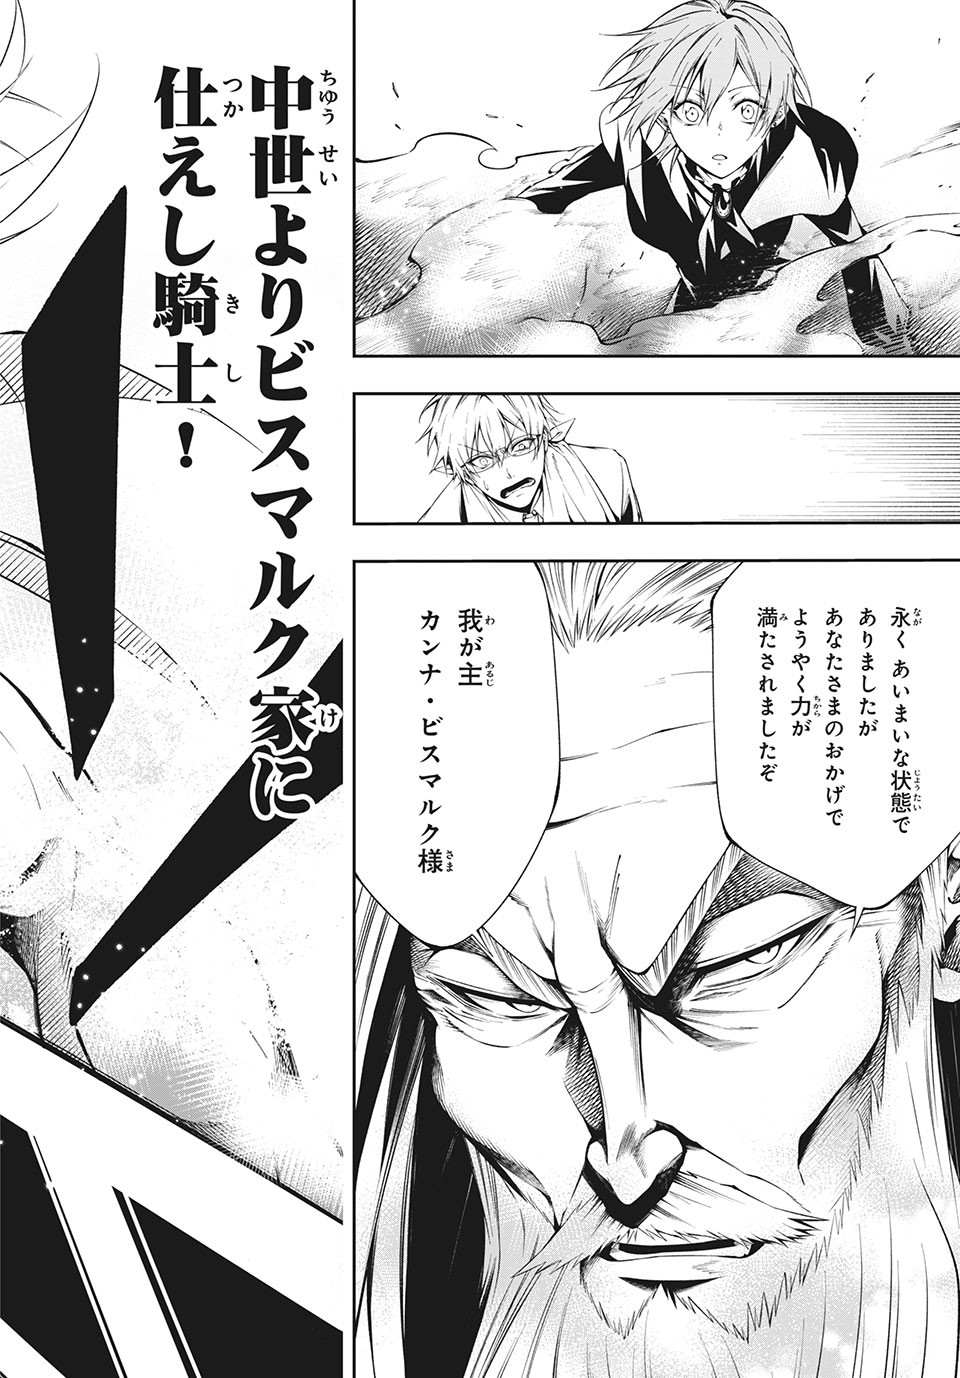 Shaman King: and a garden 第4.3話 - Page 10